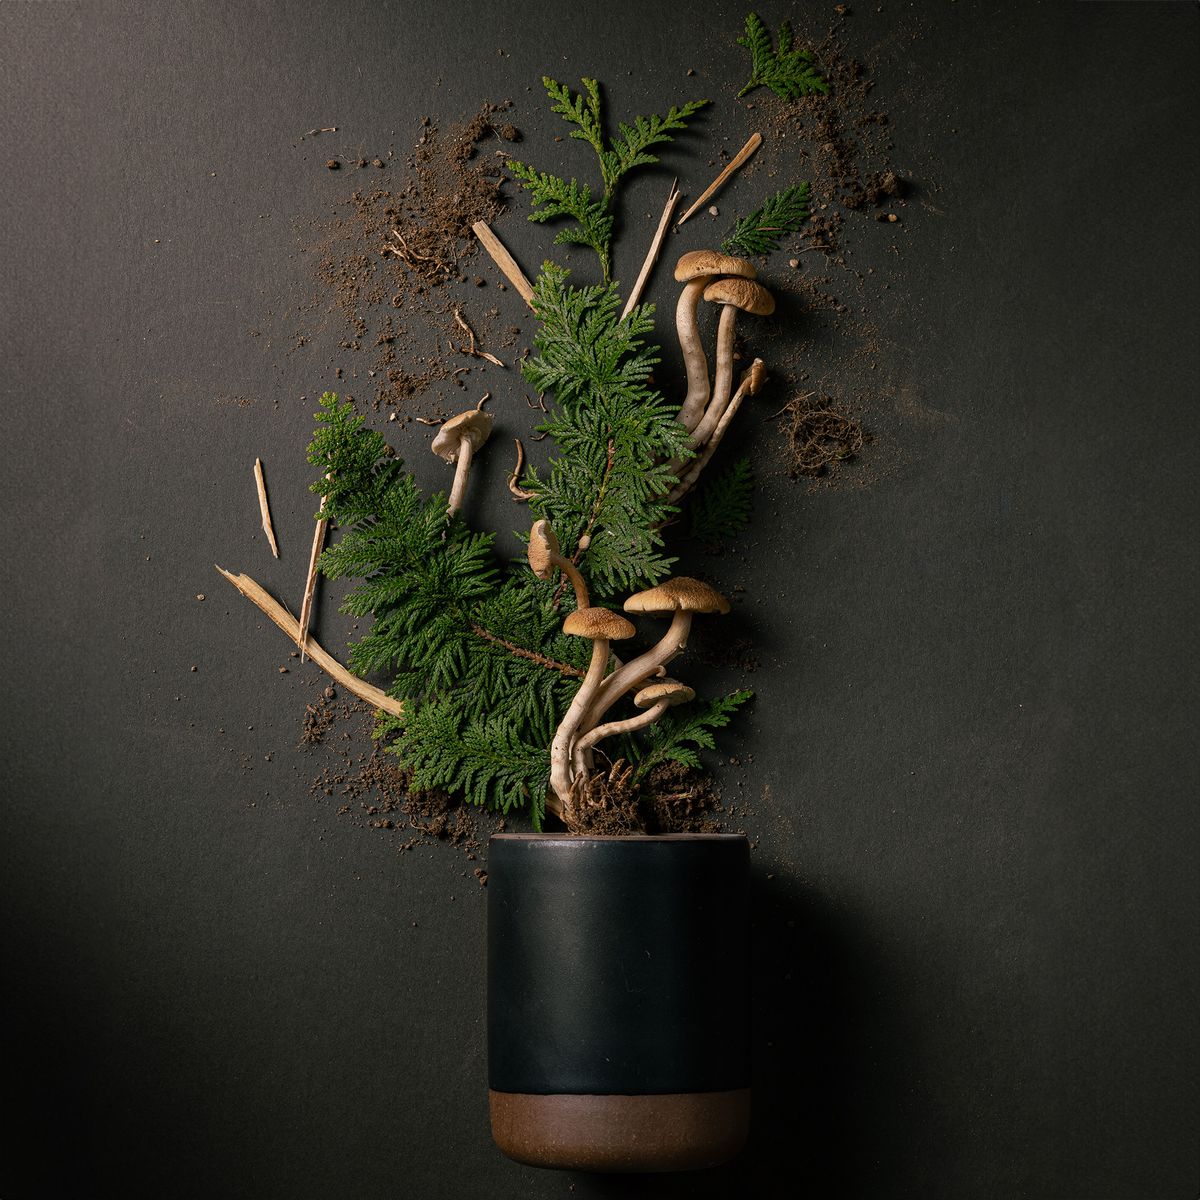 A cylindrical ceramic vessel in a muted charcoal color laying on its side - mushroom, greenery, and dirt are artfully styled coming out of the top of the candle to reflect the scent.